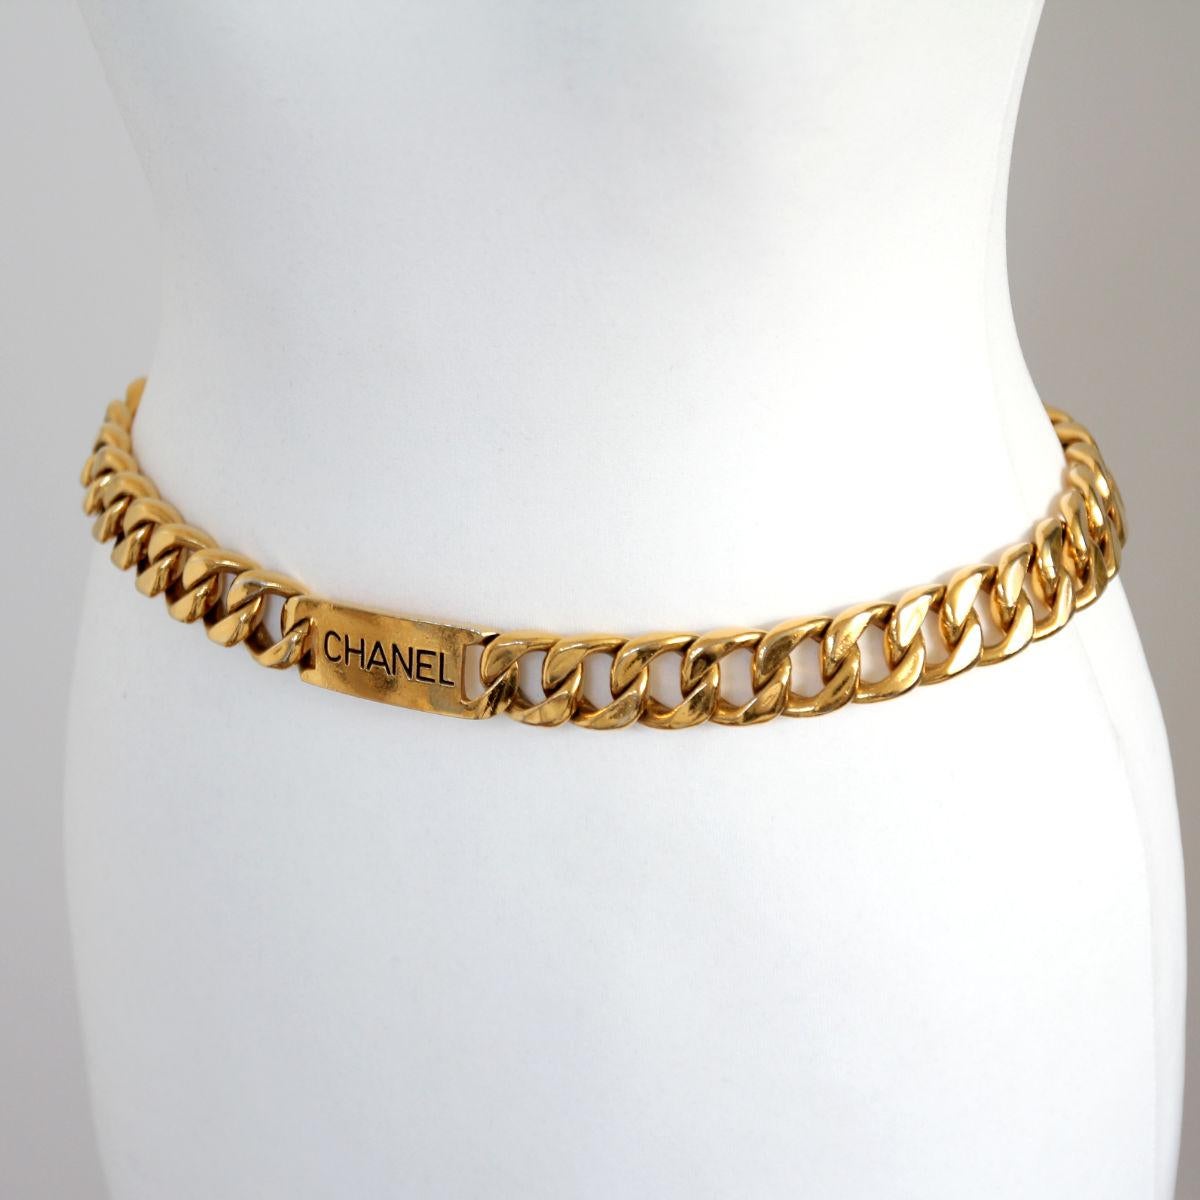 CHANEL 1990s Gold Toned Jumbo Chain Belt / Necklace With Chanel Plaque 1